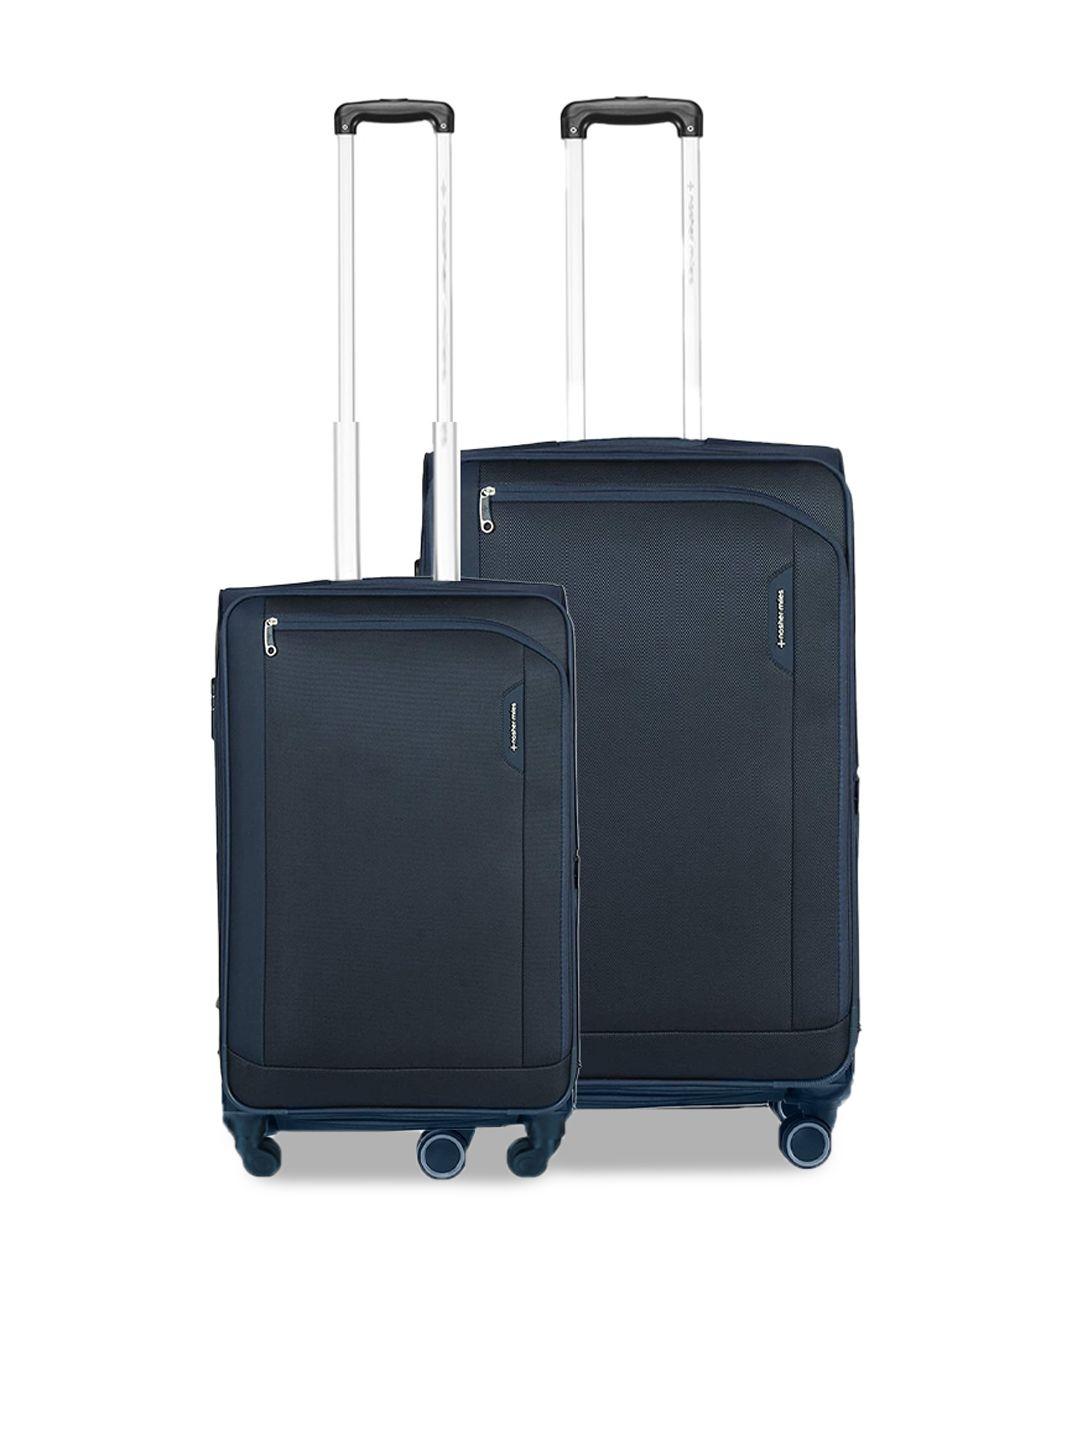 nasher miles dallas expander set of 2 soft-sided cabin & medium trolley bags